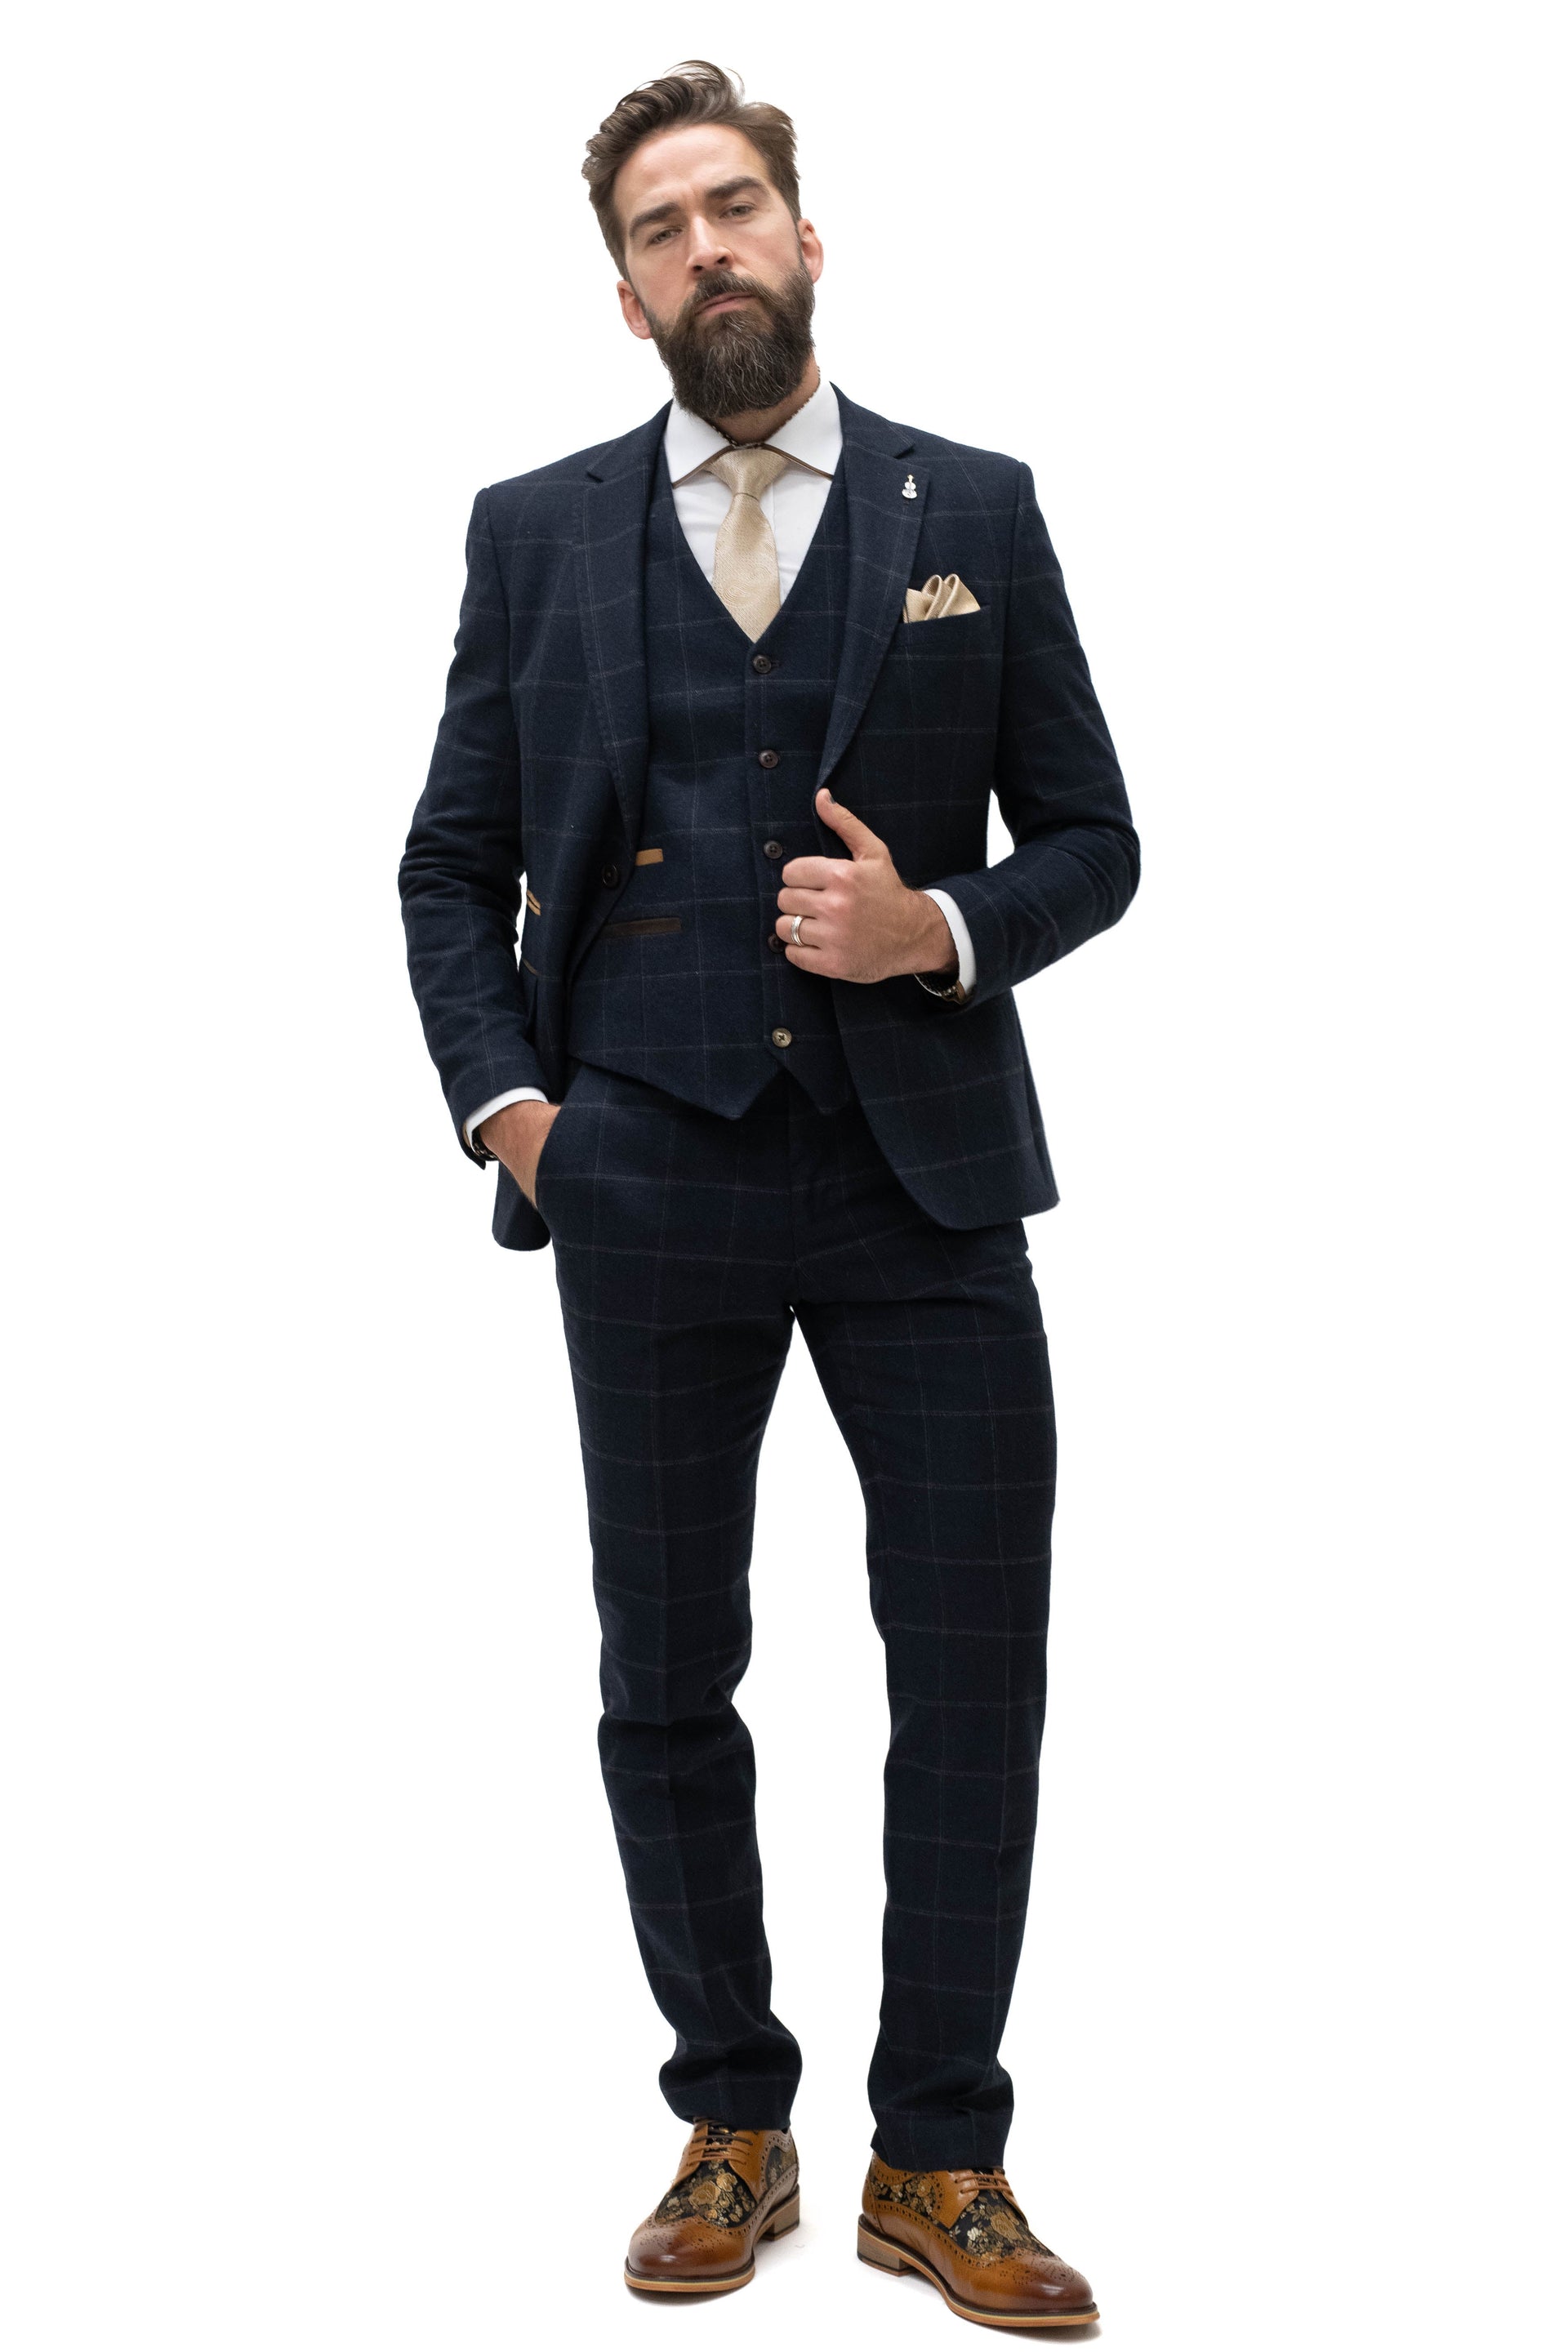 Fratelli Dark Navy Tweed Style Check 3 Piece Suit With Subtle Check ...